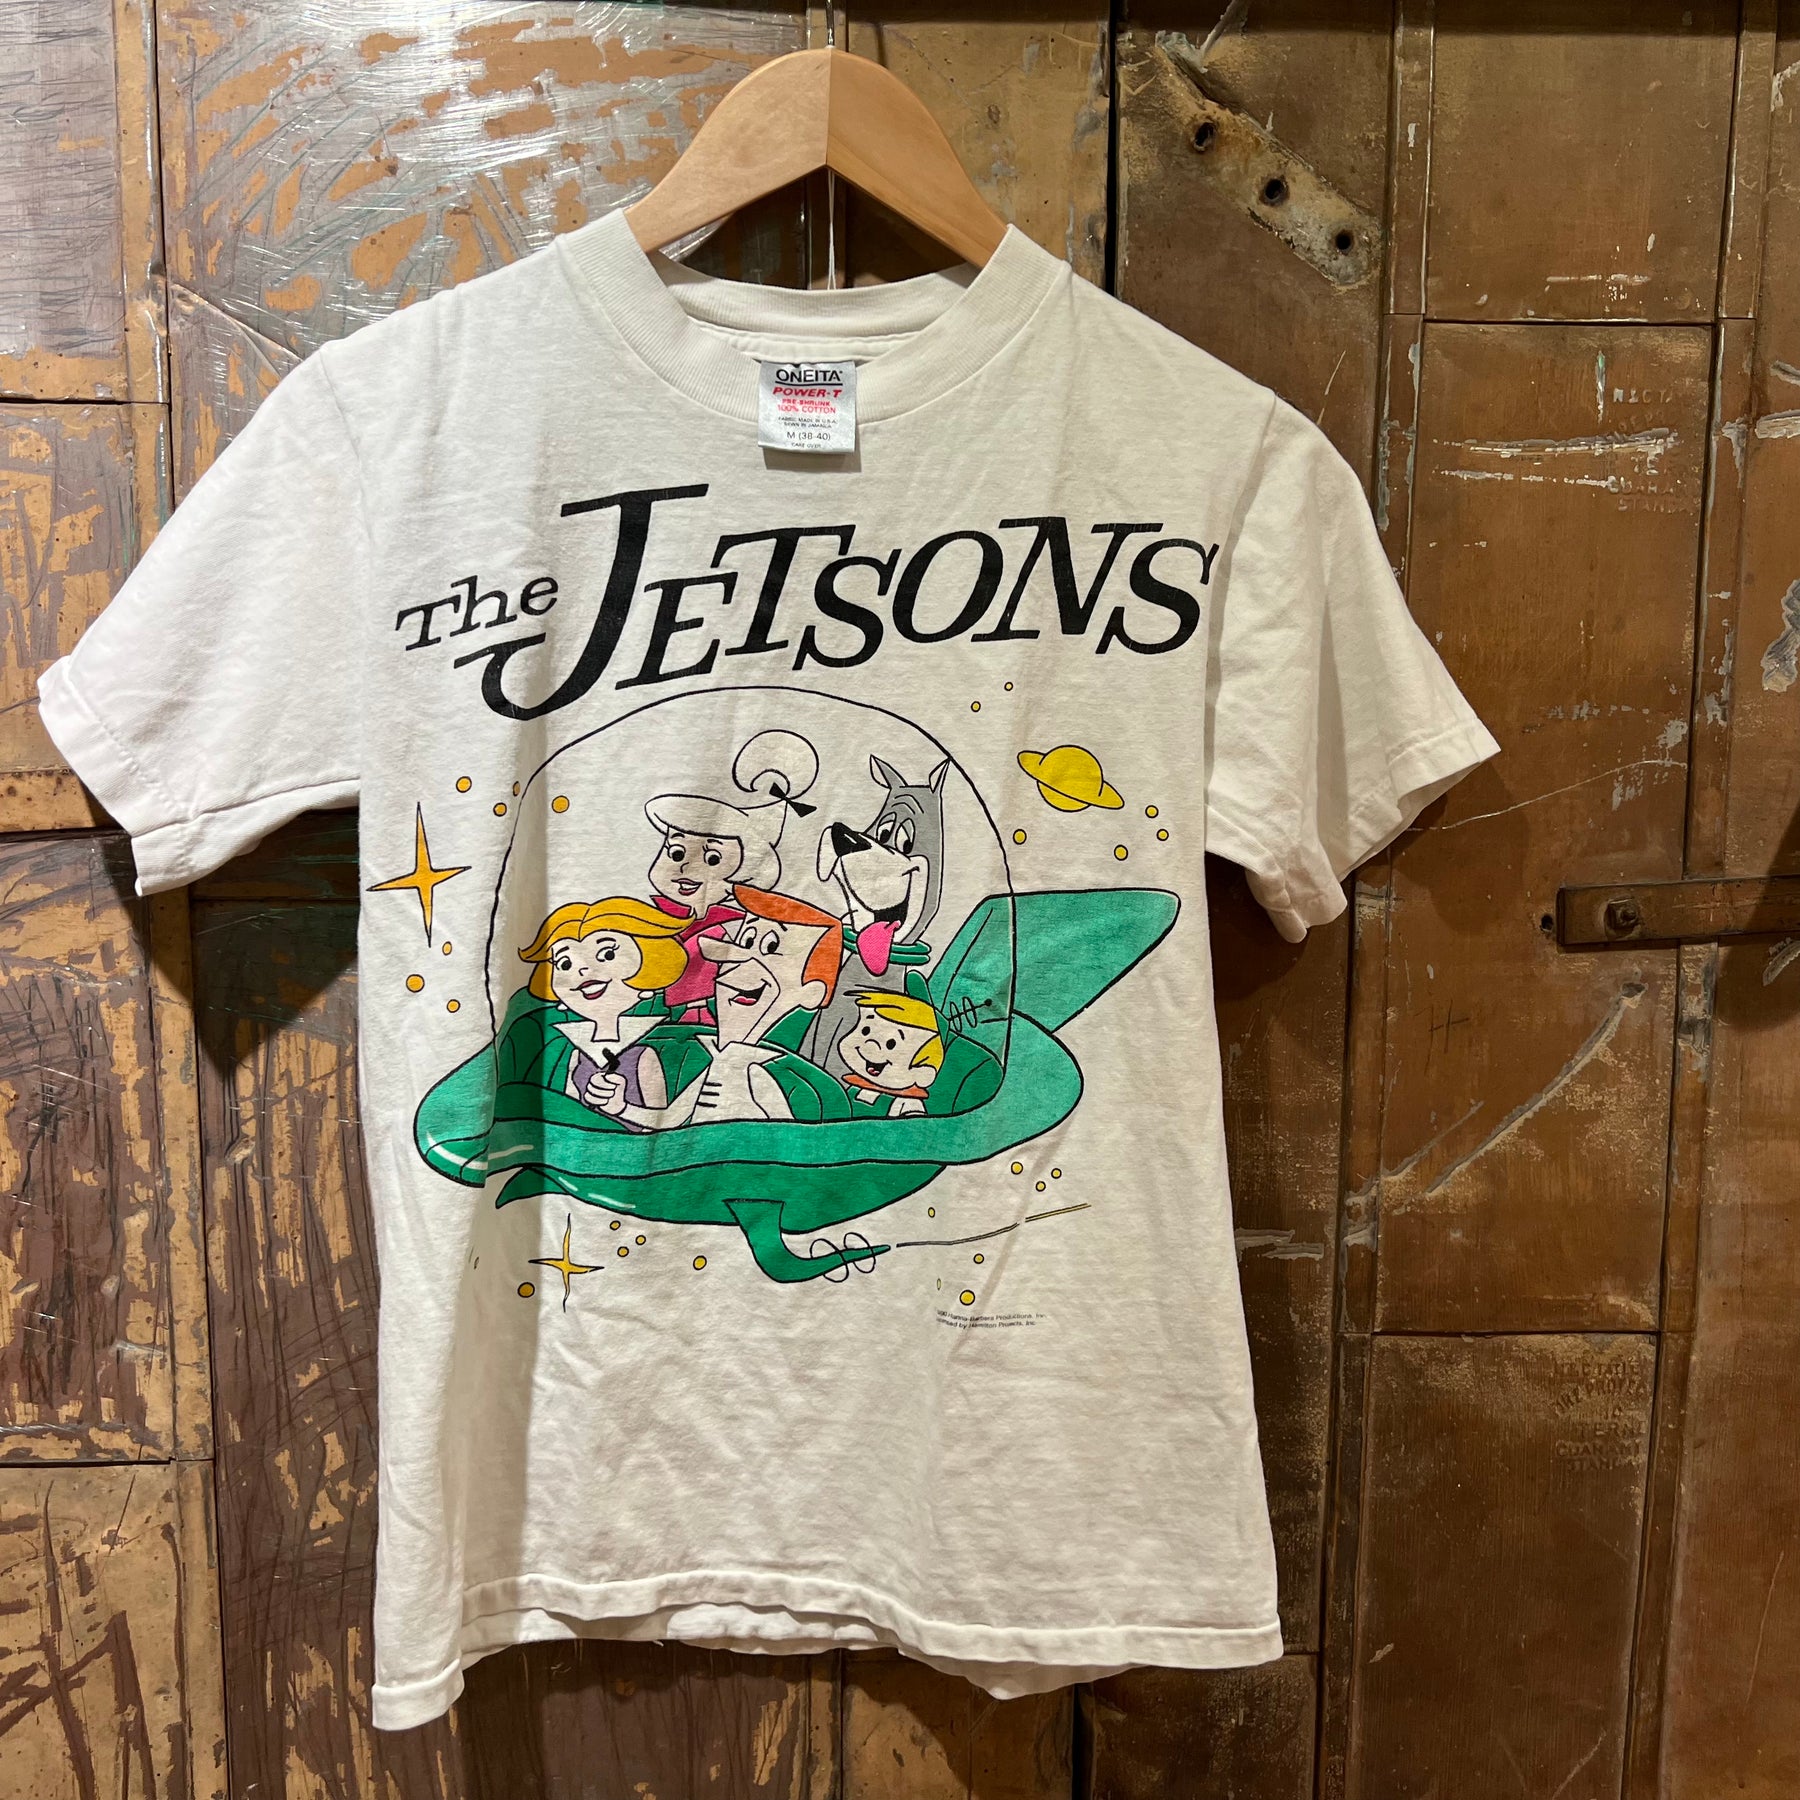 The Jetsons Tee